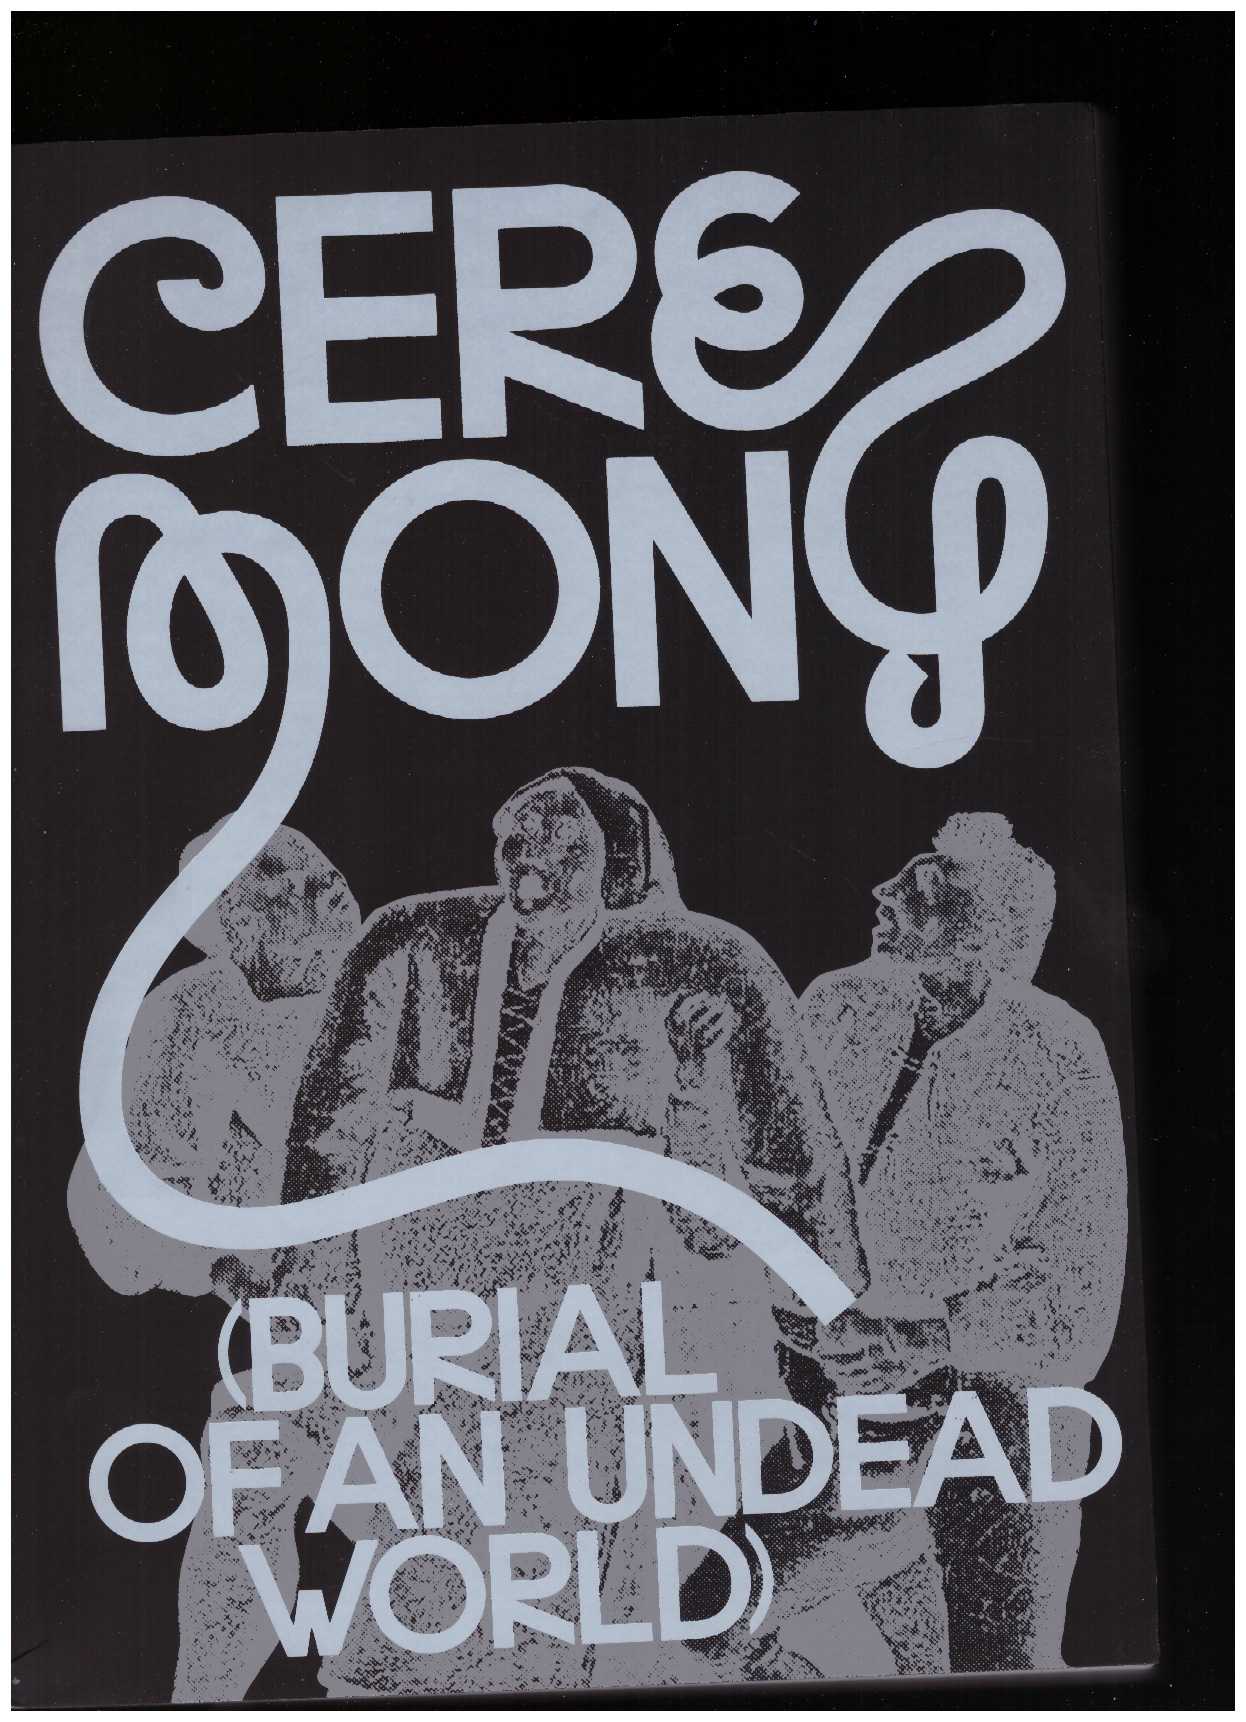 FRANKE, Anselm; GIULIANO, Elisa; TANCONS, Claire; RYNER, Denise; XIANG, Zairong (eds.) - Ceremony (Burial of an Undead World)